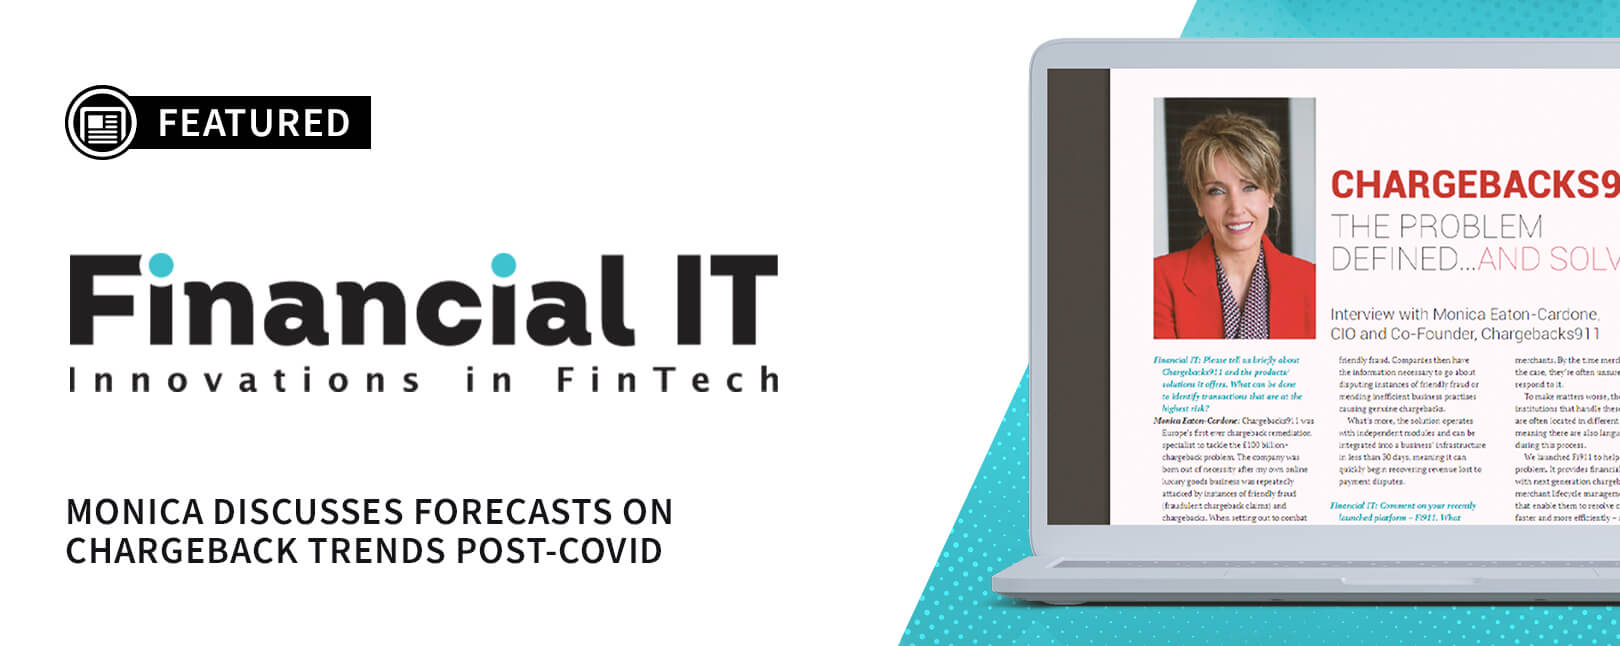 Chargebacks911® COO Interviewed in Financial IT Magazine